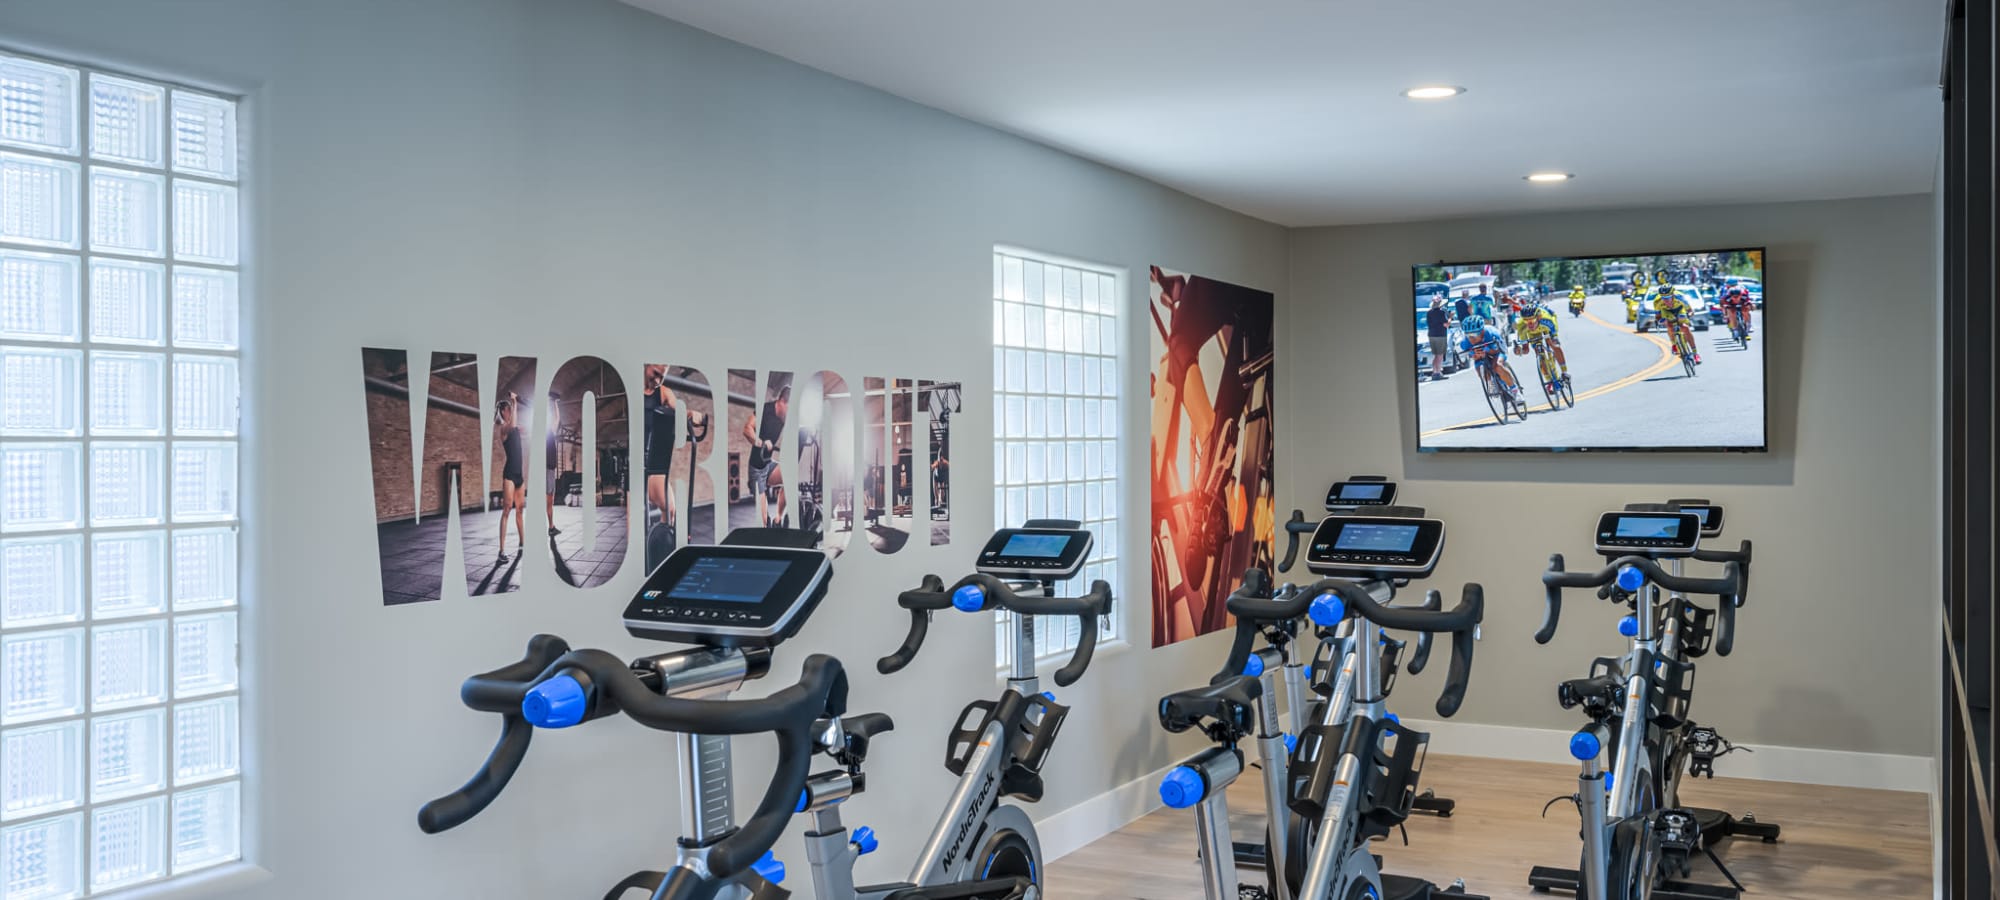 Cardio room with stationary bikes and a tv mounted to the wall at Elite North Scottsdale in Scottsdale, Arizona